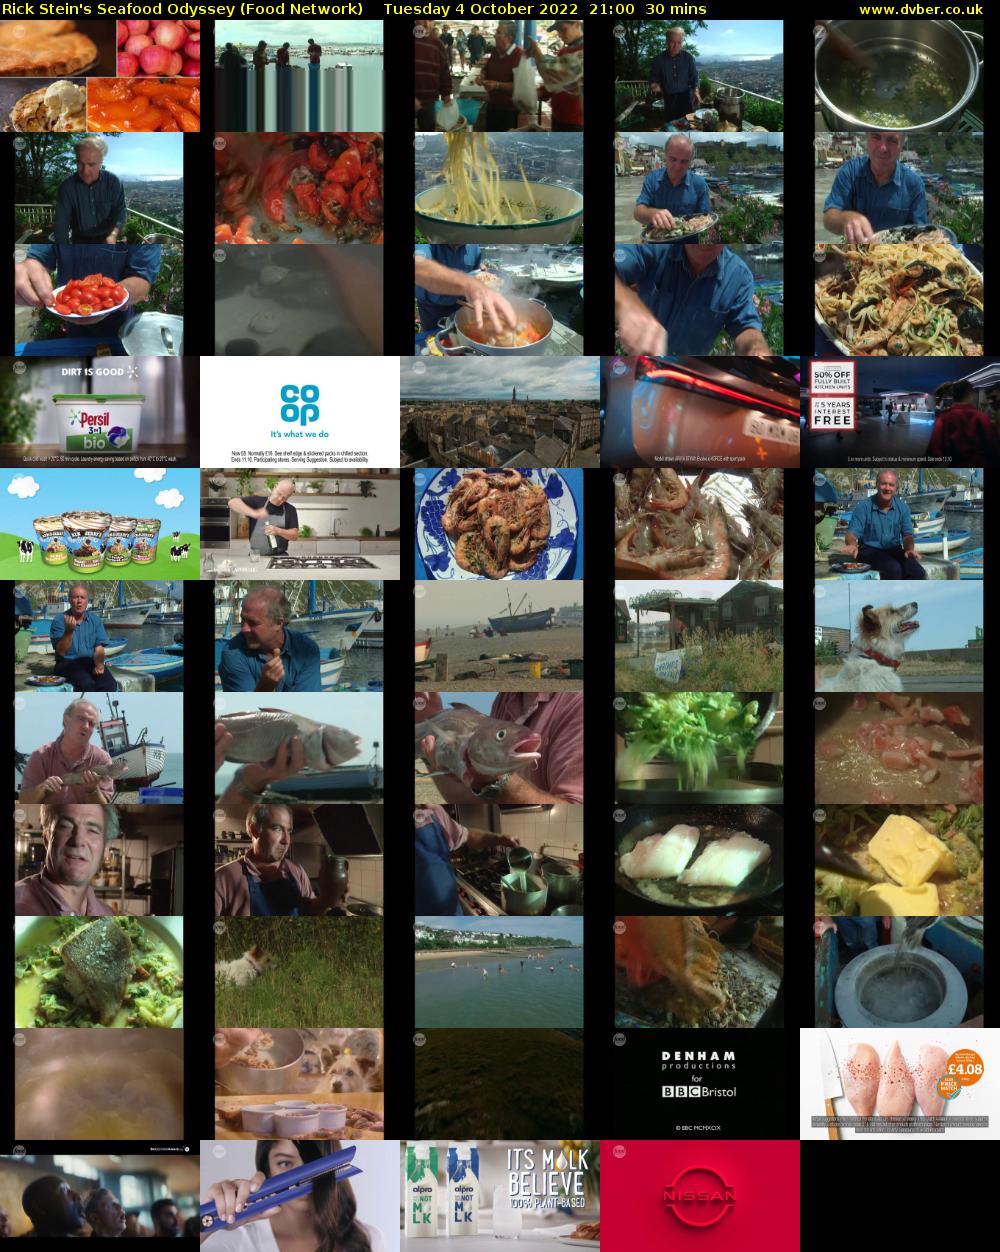 Rick Stein's Seafood Odyssey (Food Network) Tuesday 4 October 2022 21:00 - 21:30